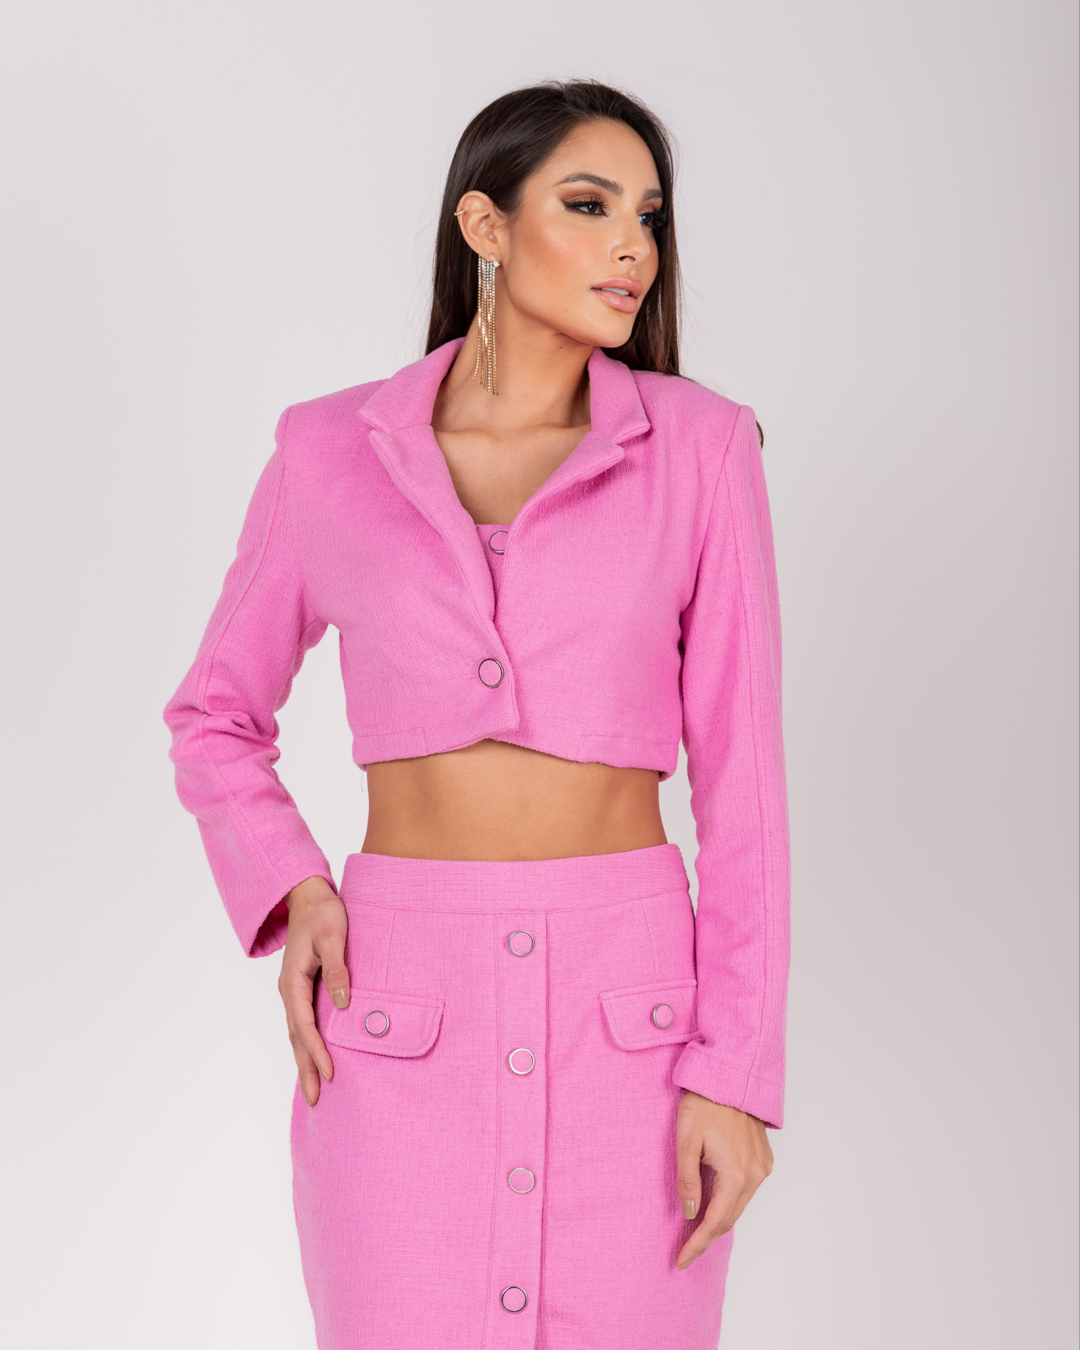 Miss Misses - Jacket Miss Misses Cropped Pink Tweed Button - 54057060